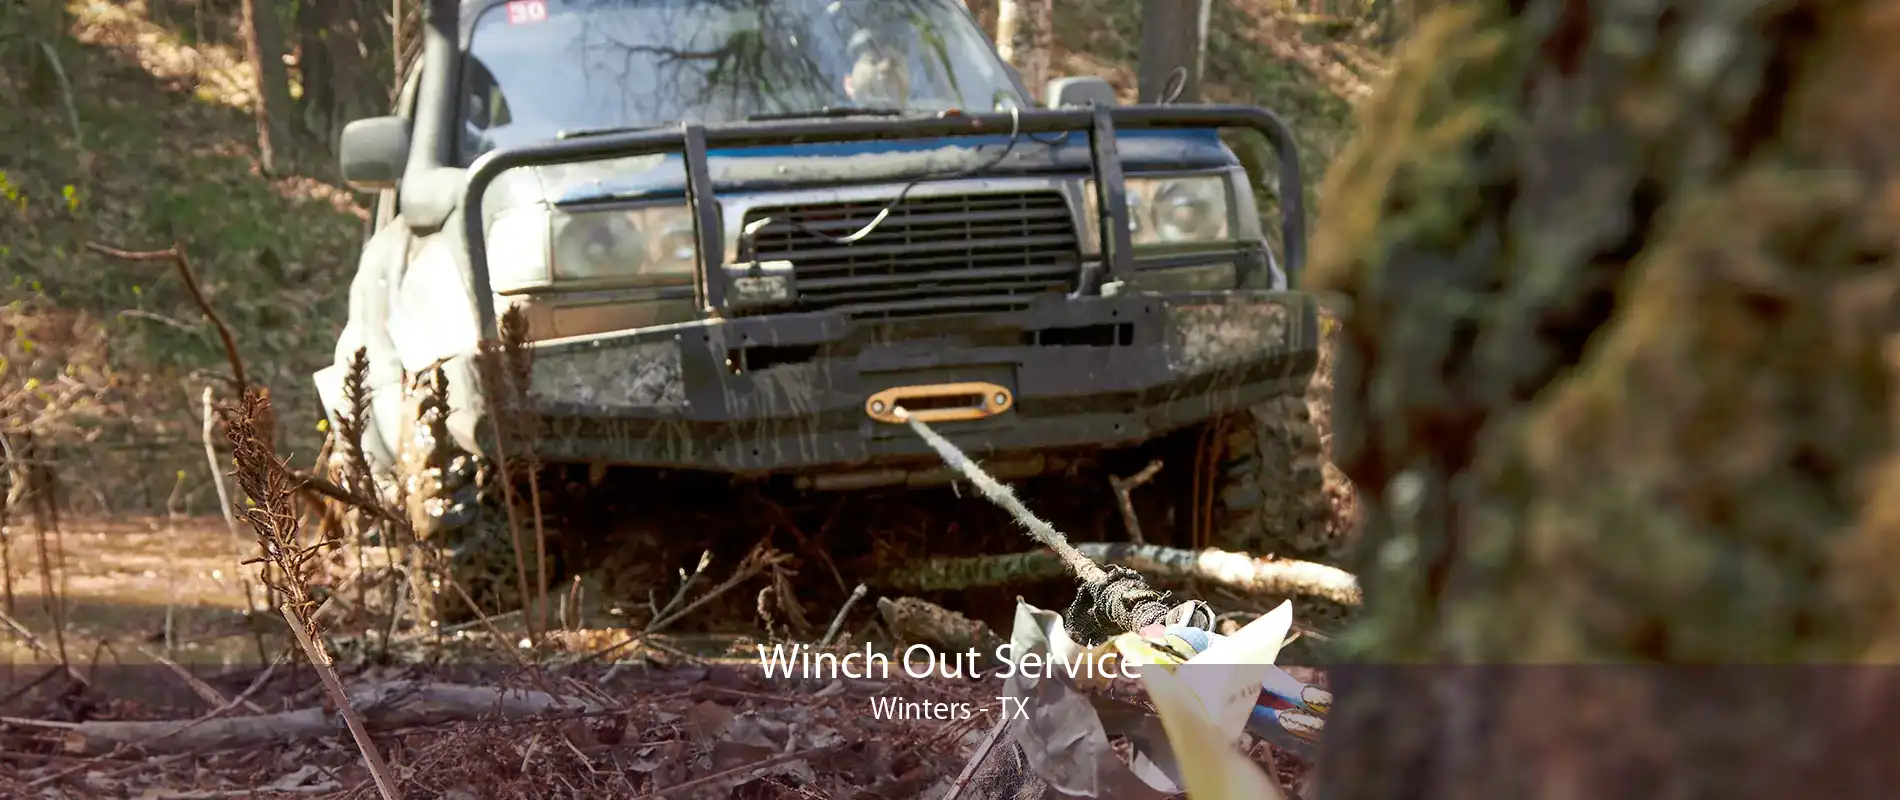 Winch Out Service Winters - TX